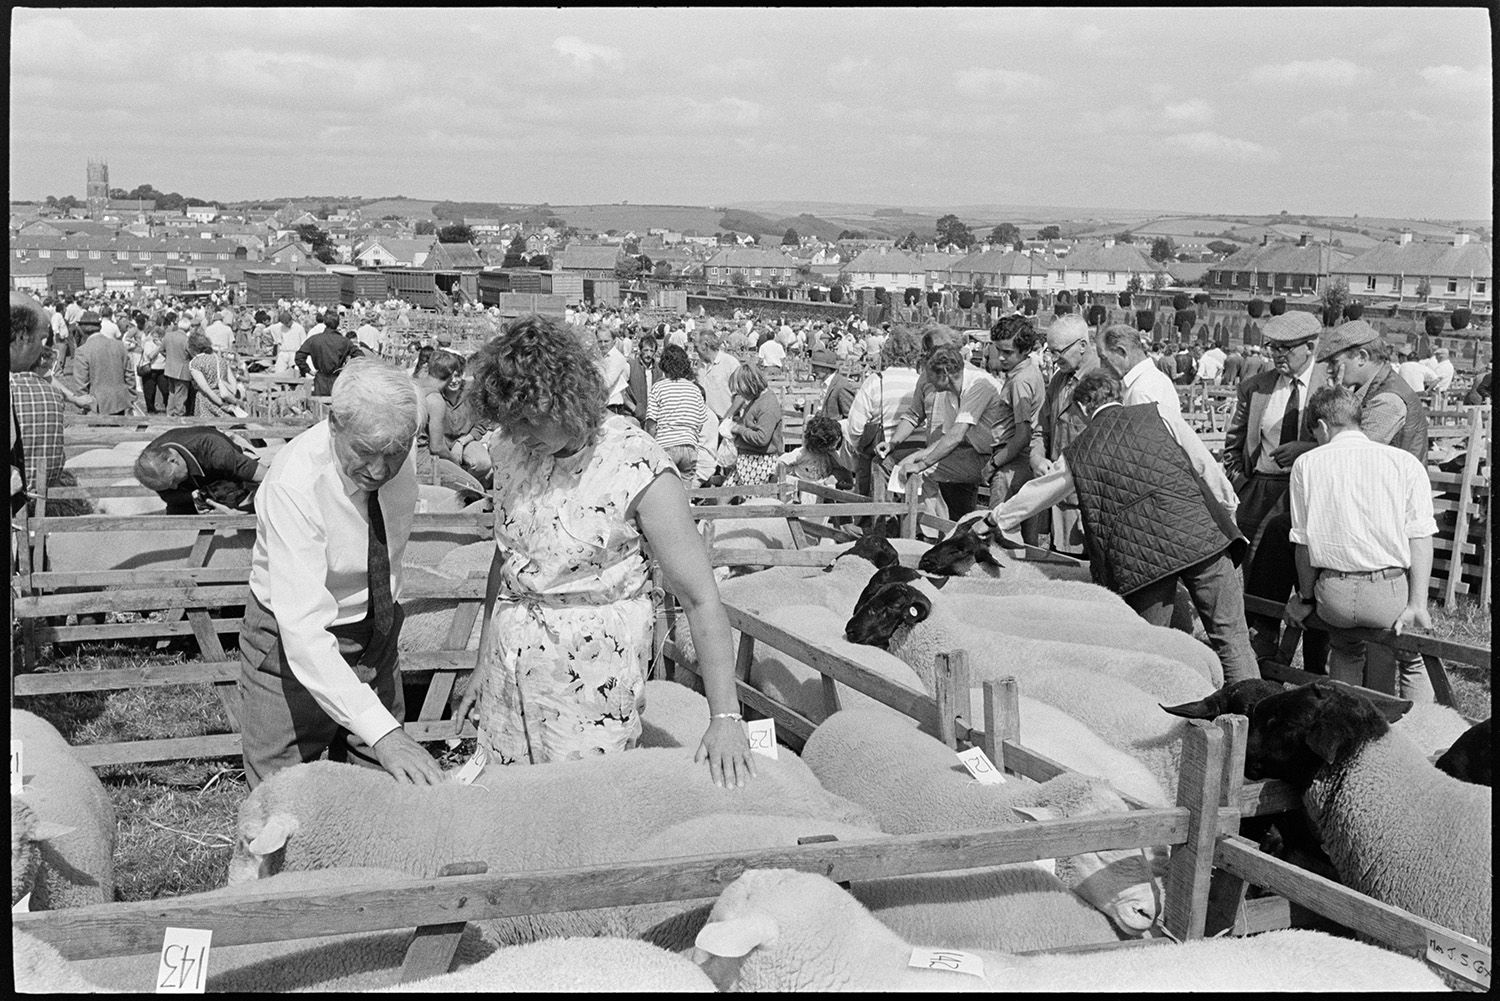 View over pens at sheep fair, farmers checking sheep, clerks at sale office in shed. 
[A man and woman checking a sheep in a wooden pen at South Molton Sheep Fair. People are looking at sheep in other pens behind them. The town of South Molton, including the church tower, is visible in the background.]